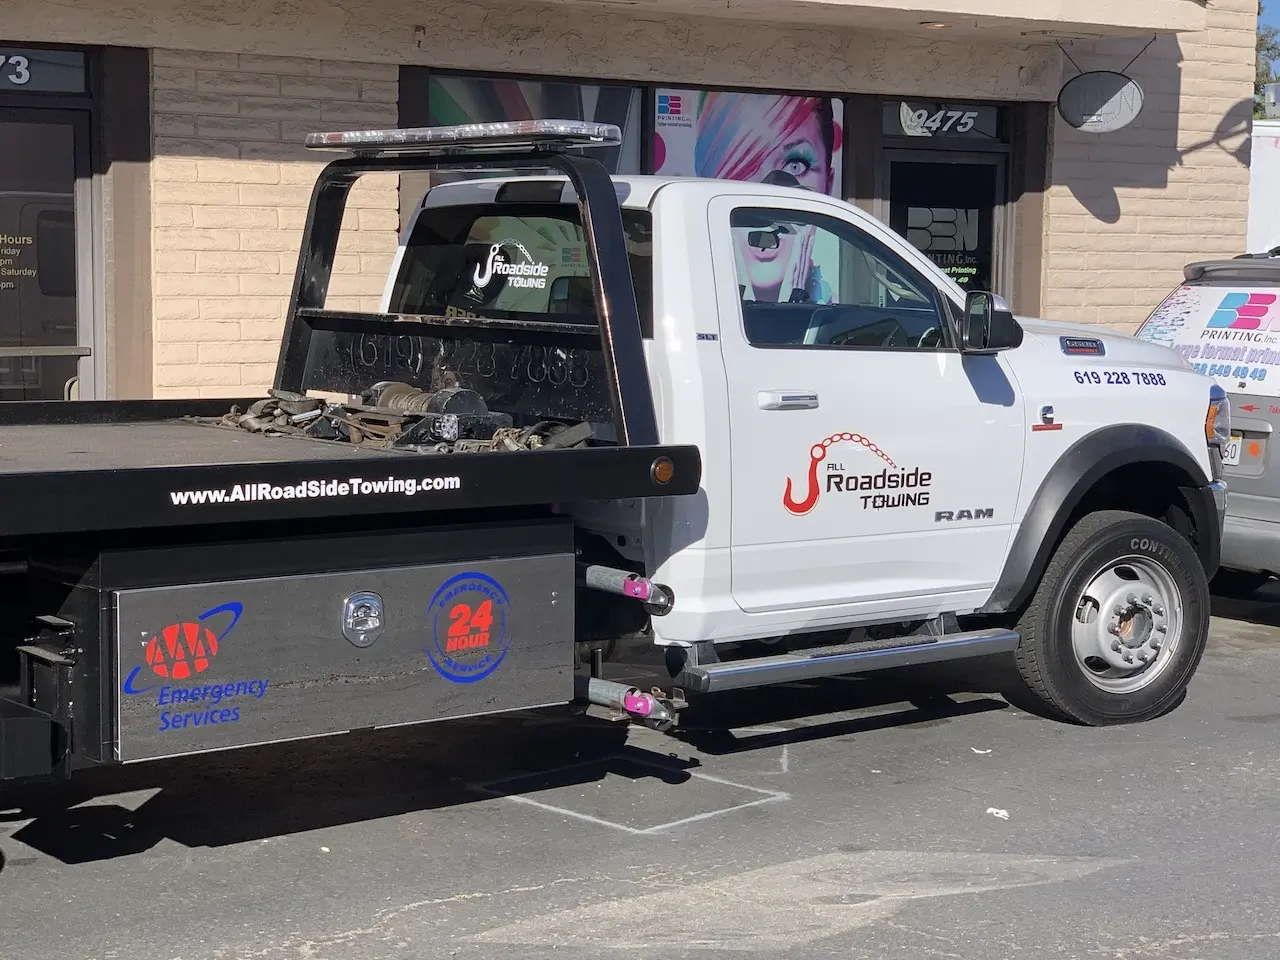 New Flatbed for All Roadside Towing Company